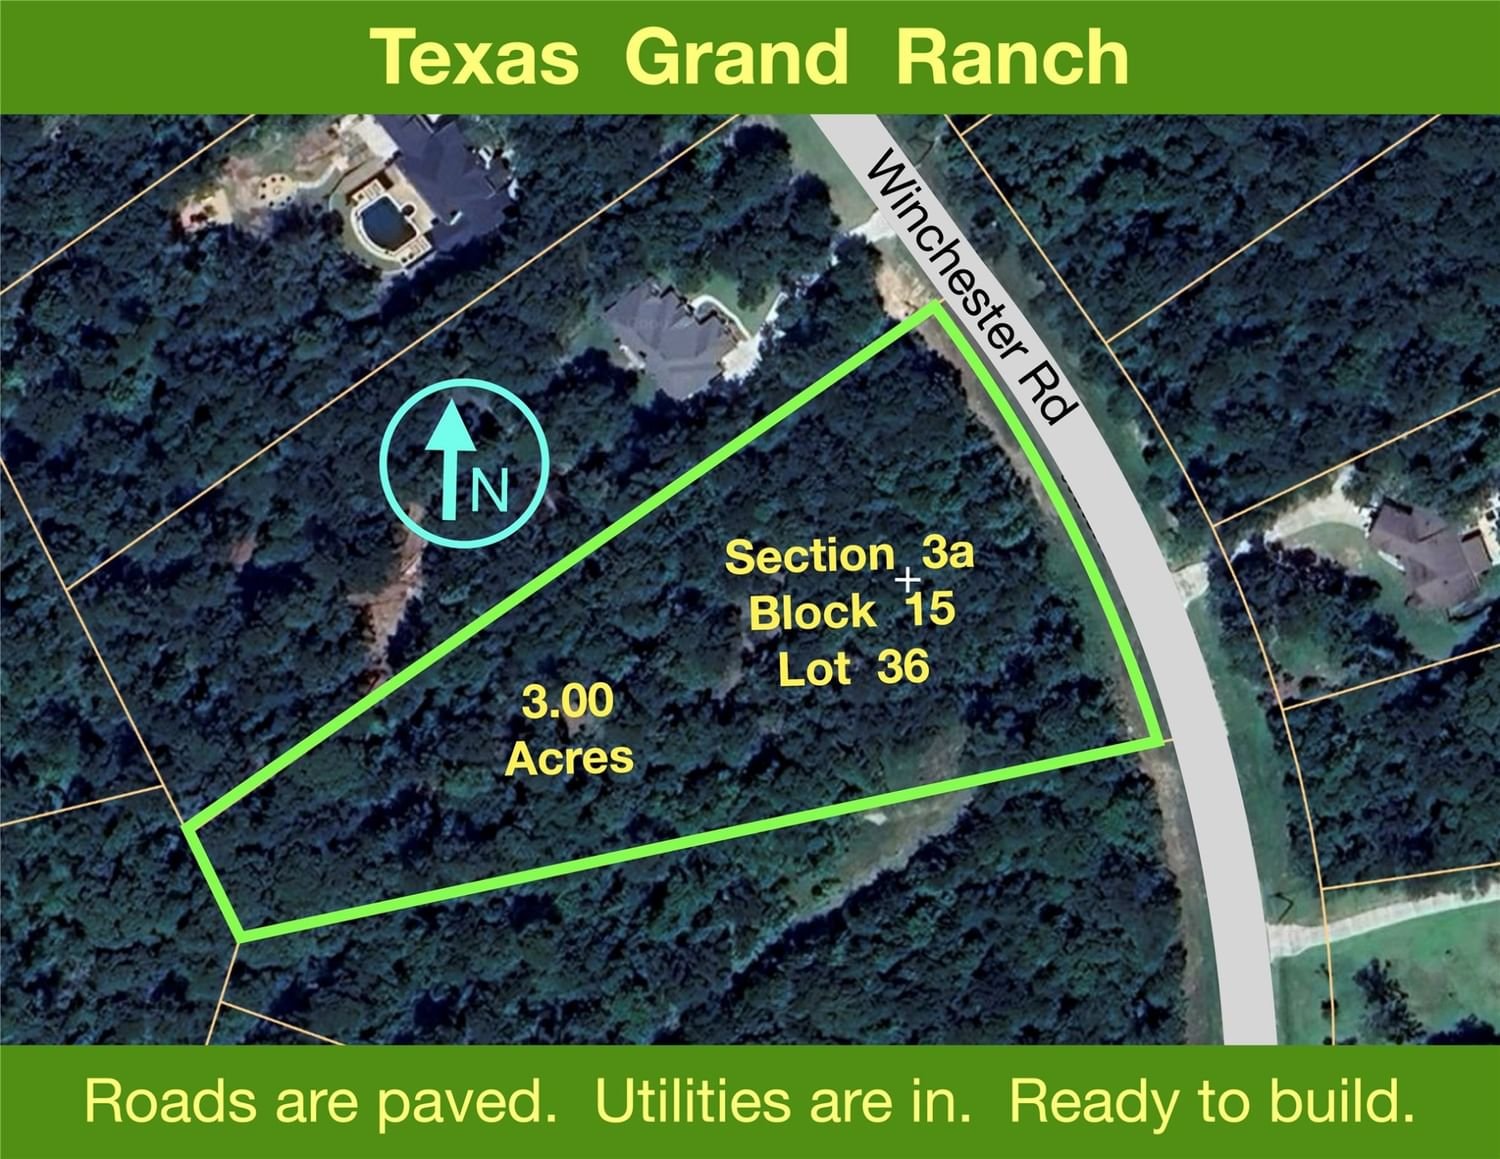 Real estate property located at 3a-15-36 Winchester, Walker, I Texas Grand Ranch, Huntsville, TX, US